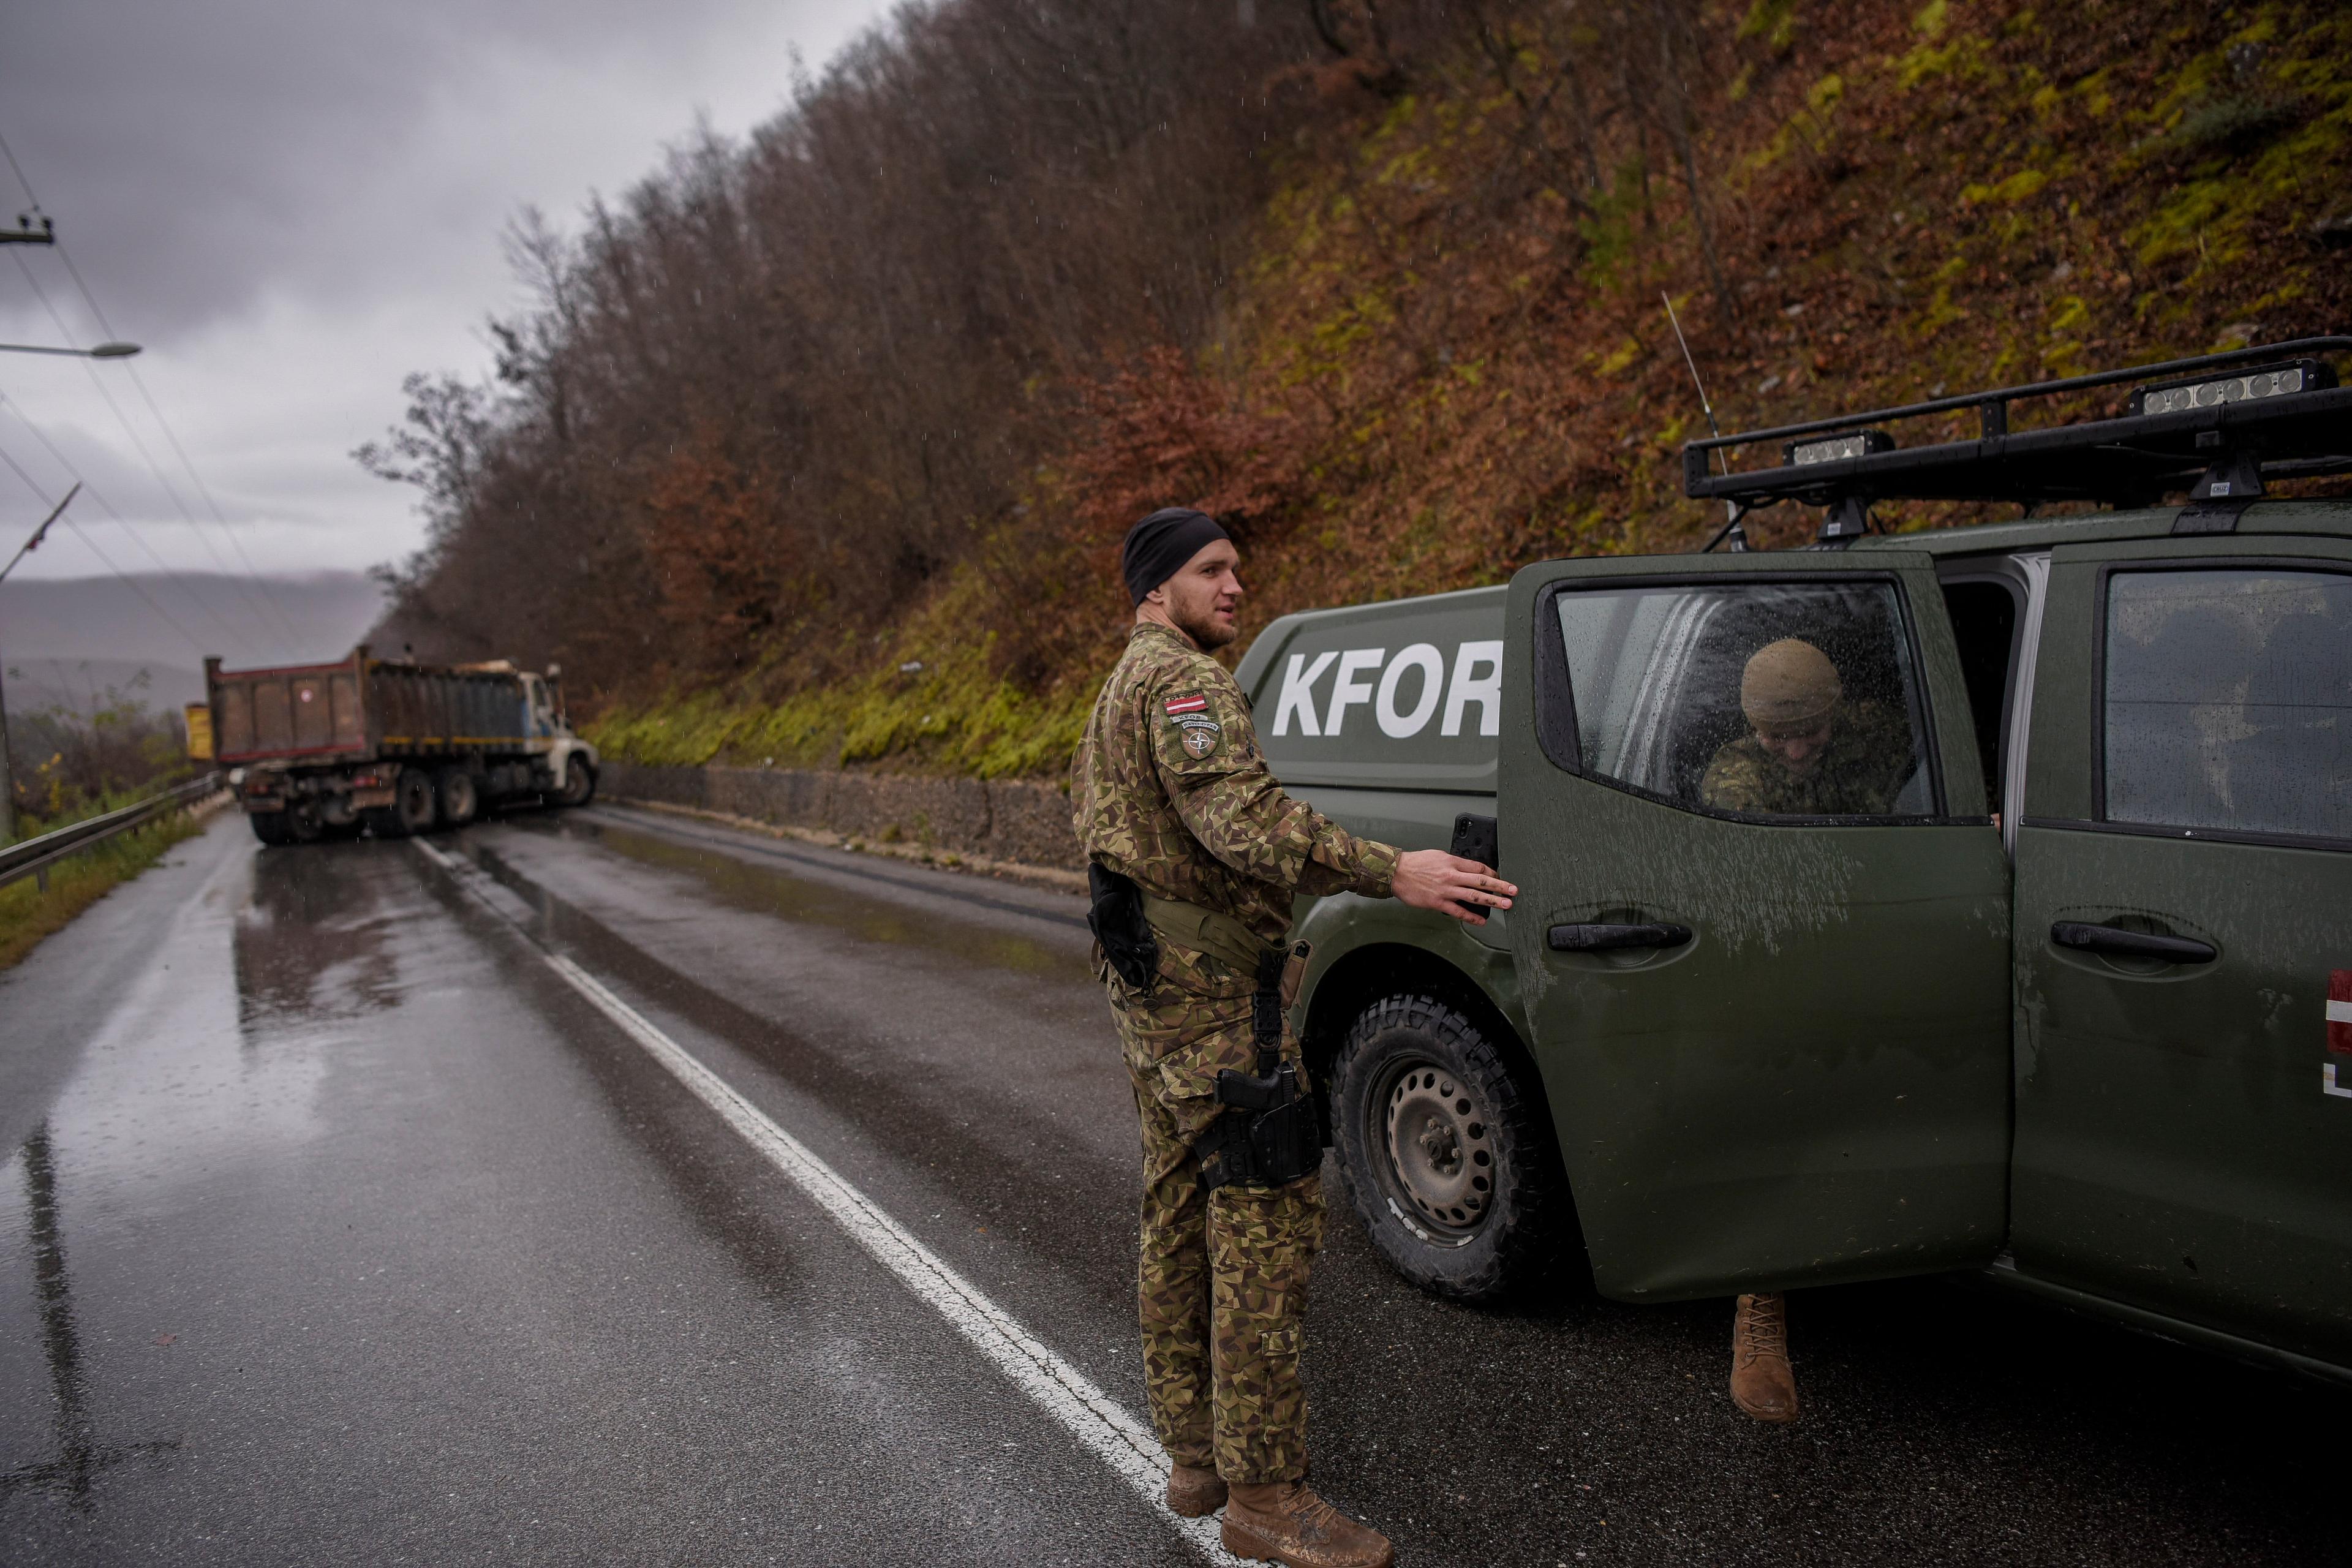 NATO soldiers serving in the peacekeeping mission in Kosovo (KFOR) inspect a road barricade set up by ethnic Serbs near the town of Zubin Potok on December 11, 2022. - Hundreds of ethnic Serbs erected barricades on a road in northern Kosovo on Saturday, blocking the traffic over the two main border crossings towards Serbia, police said. Trucks, ambulance cars and agricultural machines were used as roadblocks, heightening recent tensions which included explosions, shootings and an armed attack on a police patrol which saw one ethnic Albanian police officer wounded. (Photo by Armend NIMANI / AFP)